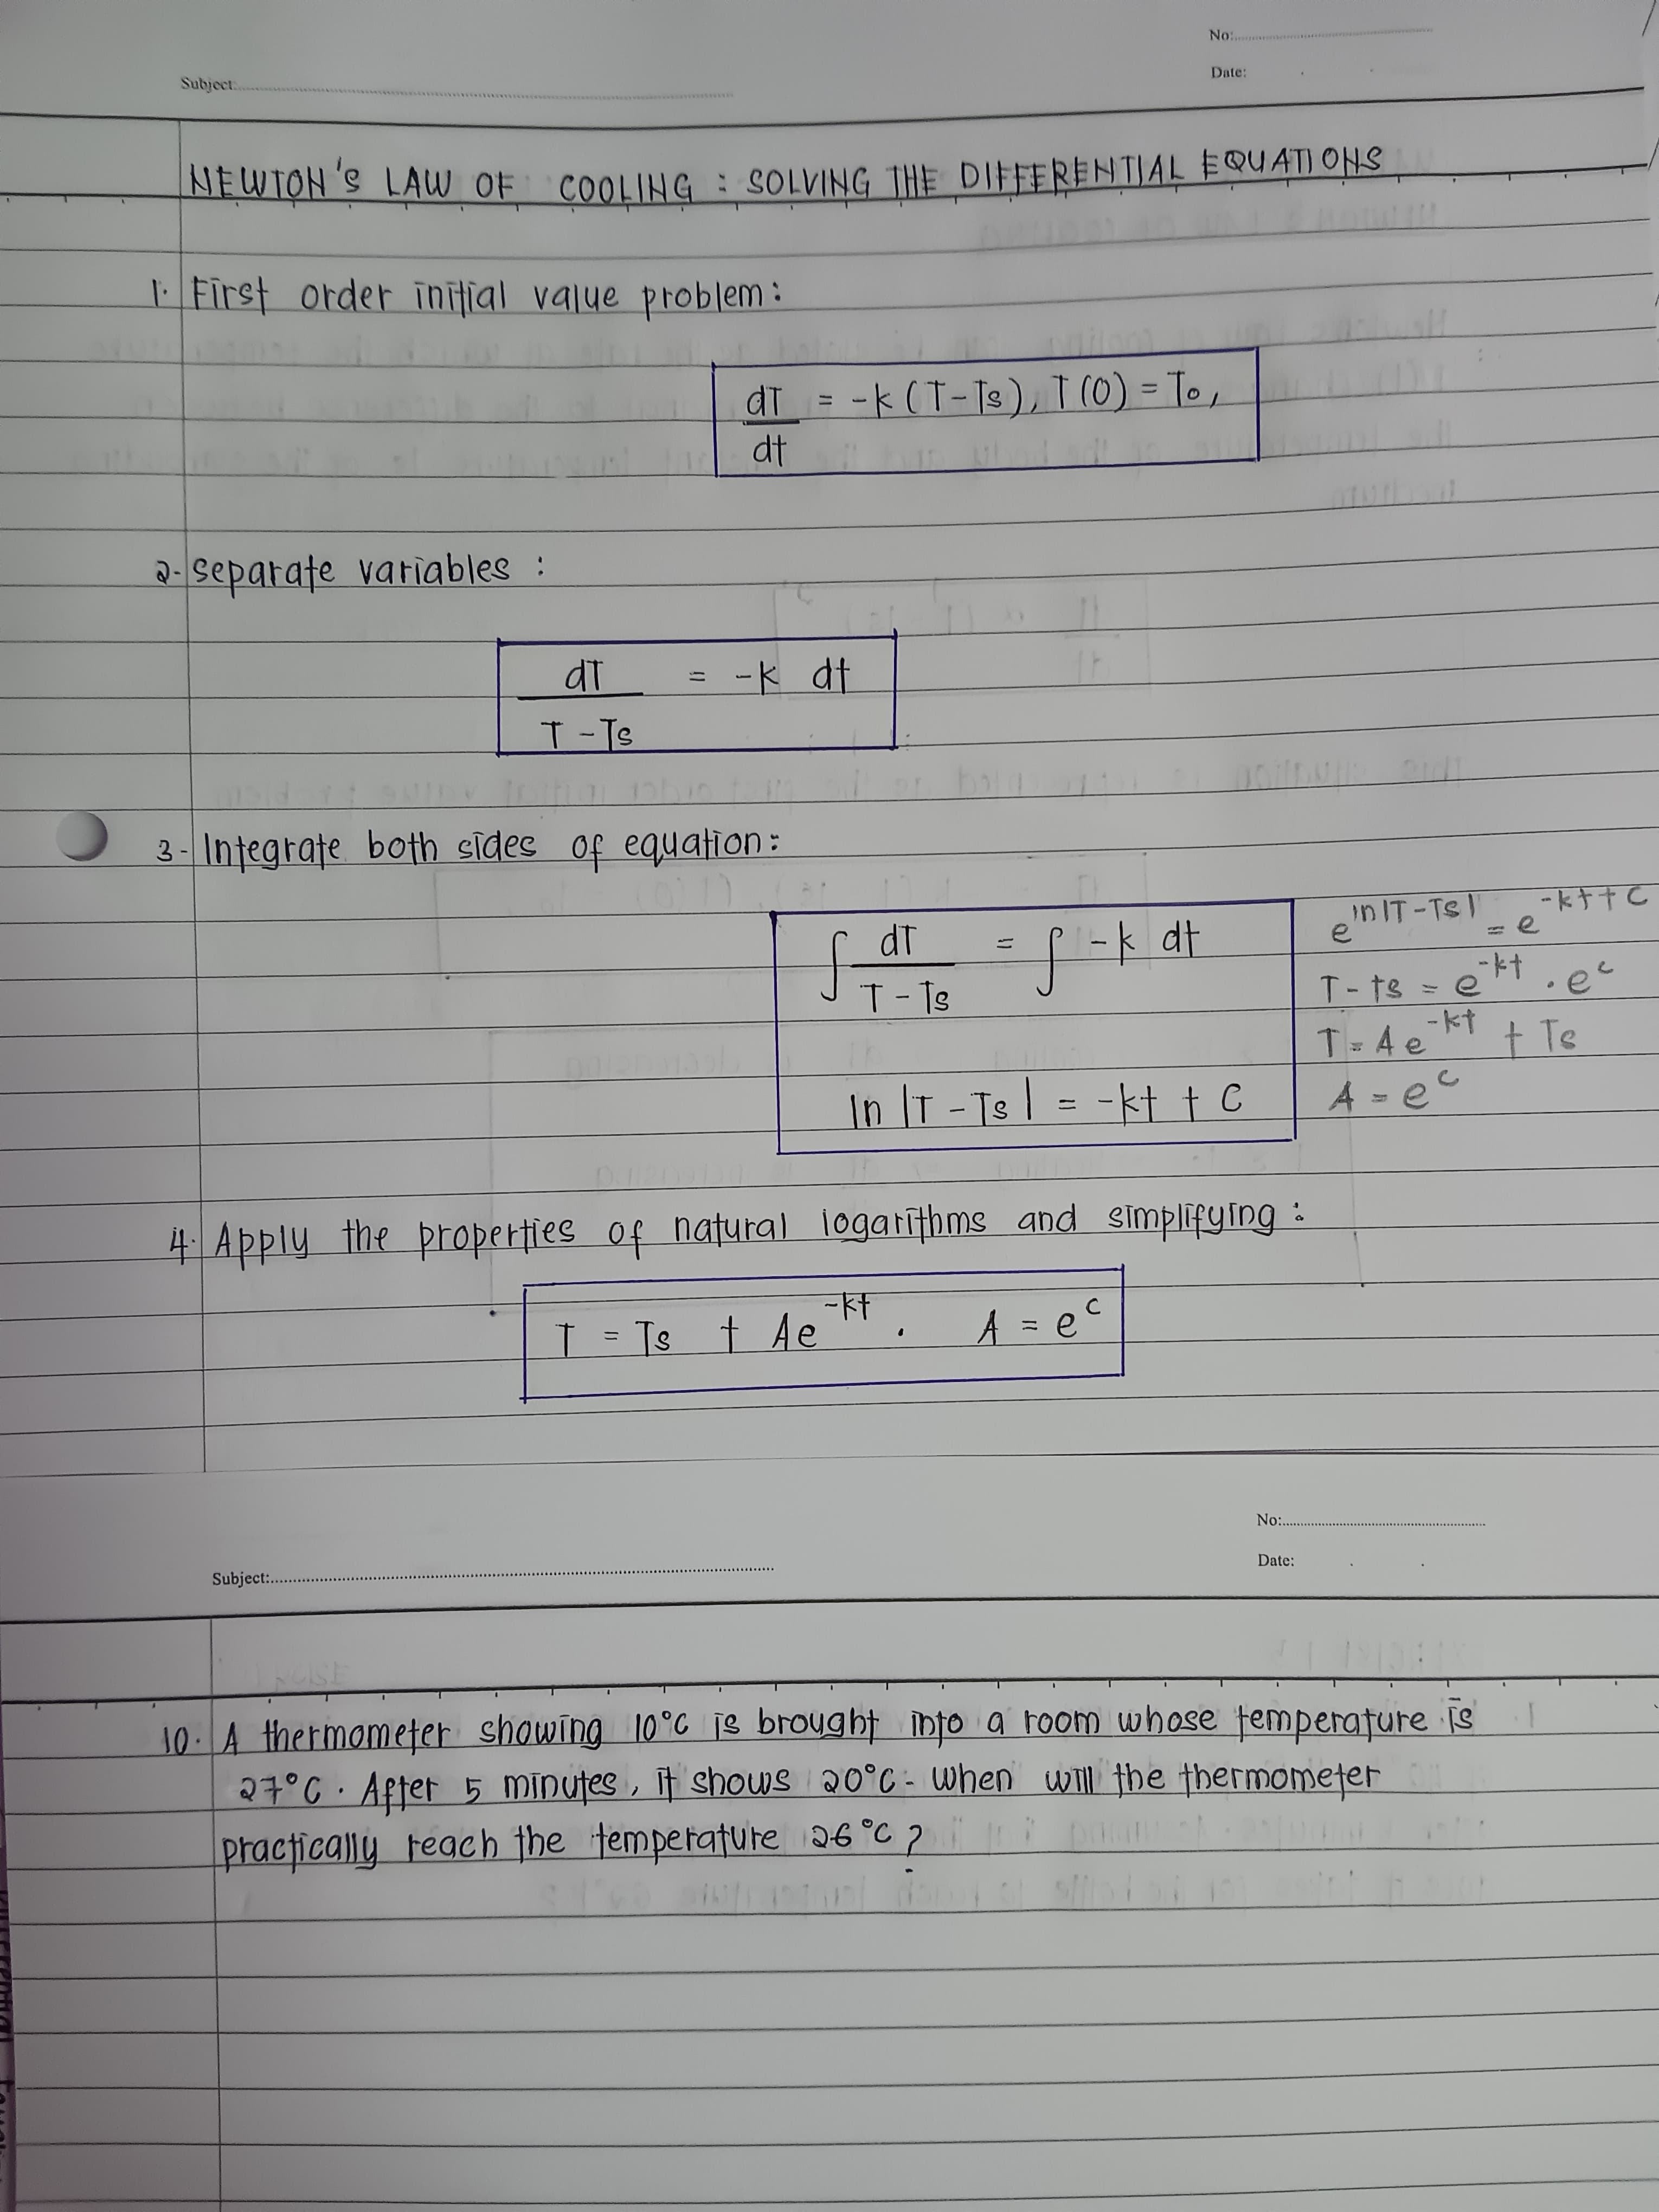 li
No:..
Subject.
Date:
NEWTON'S LAW OF COOLING: SOLVING THE DIFFERENTIAL EQUAT) ONS
First order inifial value problem:
di = -k (T-Ts), I (0) = To,
dt
%3D
%3D
2-separate vatiables :
dT
ード dt
T-Ts
3- Integrate both sides of equation:
nIT-Ts '
e
-kナtC
:e
dt
-kt.e
T-Ts
T-ts = e
T=4ekt
tTe
In |T -Ts | = -kt † C
4 Apply the properties of natural logatīthms and simplifying :
-kt
T = Ts t Ae ". A = e°
C
No .
Subject:.
Date:
10.A thermomefer showing 10°C je broyght ibto a toom whose femperature is
27°C· After 5 Mīnutes , if shows 20°C - when will the thermometer
practically Feach the temperature 26°C 7 .
